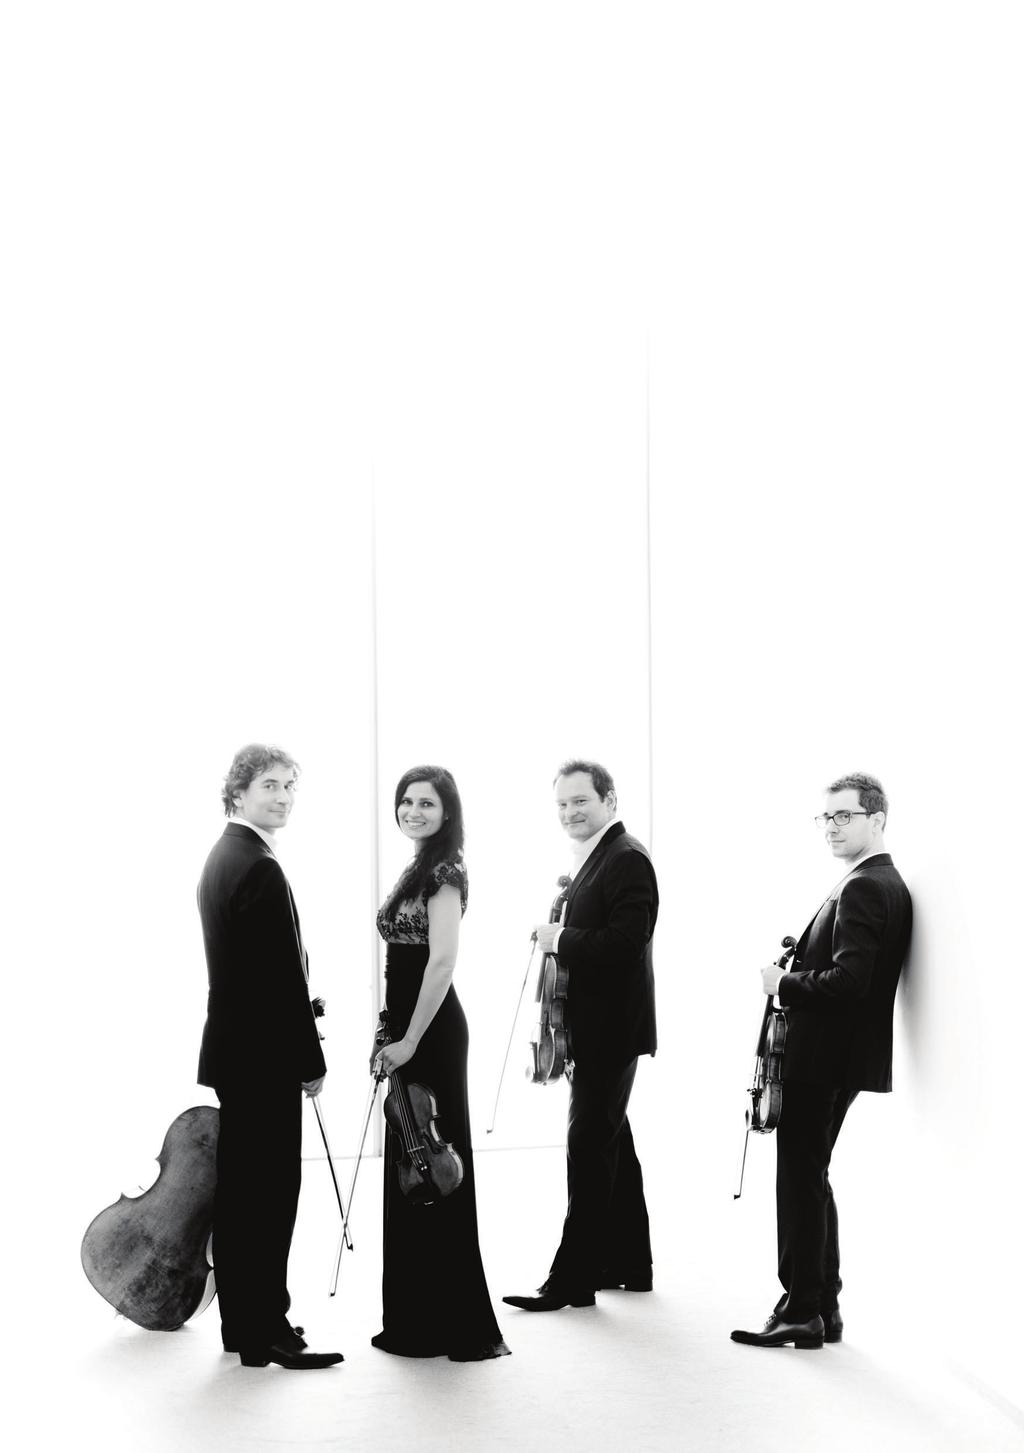 PURCHASING TICKETS FOR THE 3 MAY BELCEA QUARTET ONLY: Please call the Menuhin Hall Box Office on 08700 842020 or go onto the Menuhin website www.themenuhinhall.co.uk.